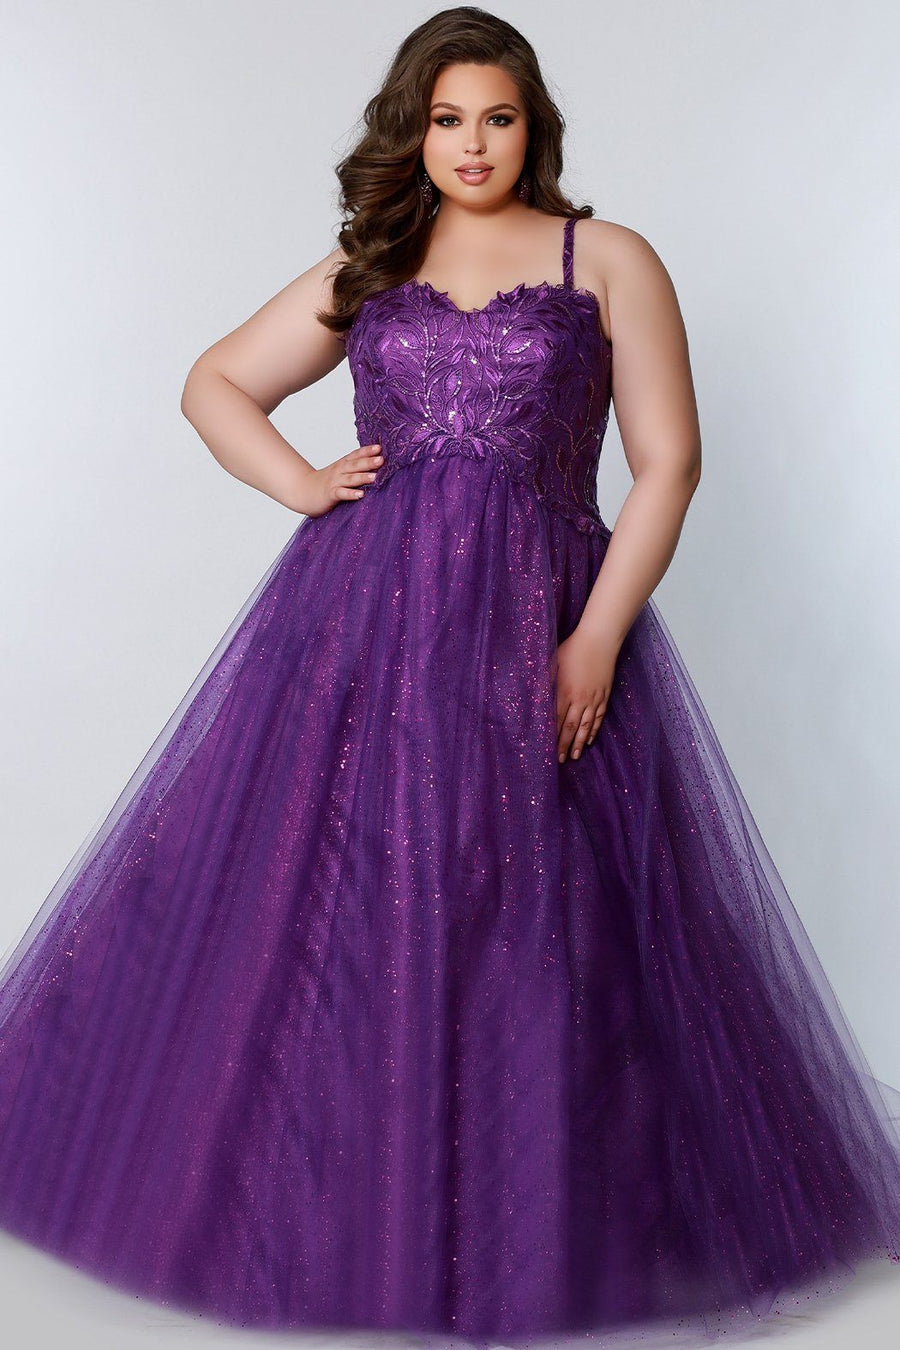 Plus Size Hollywood Lace Empire-Waist Prom Dress